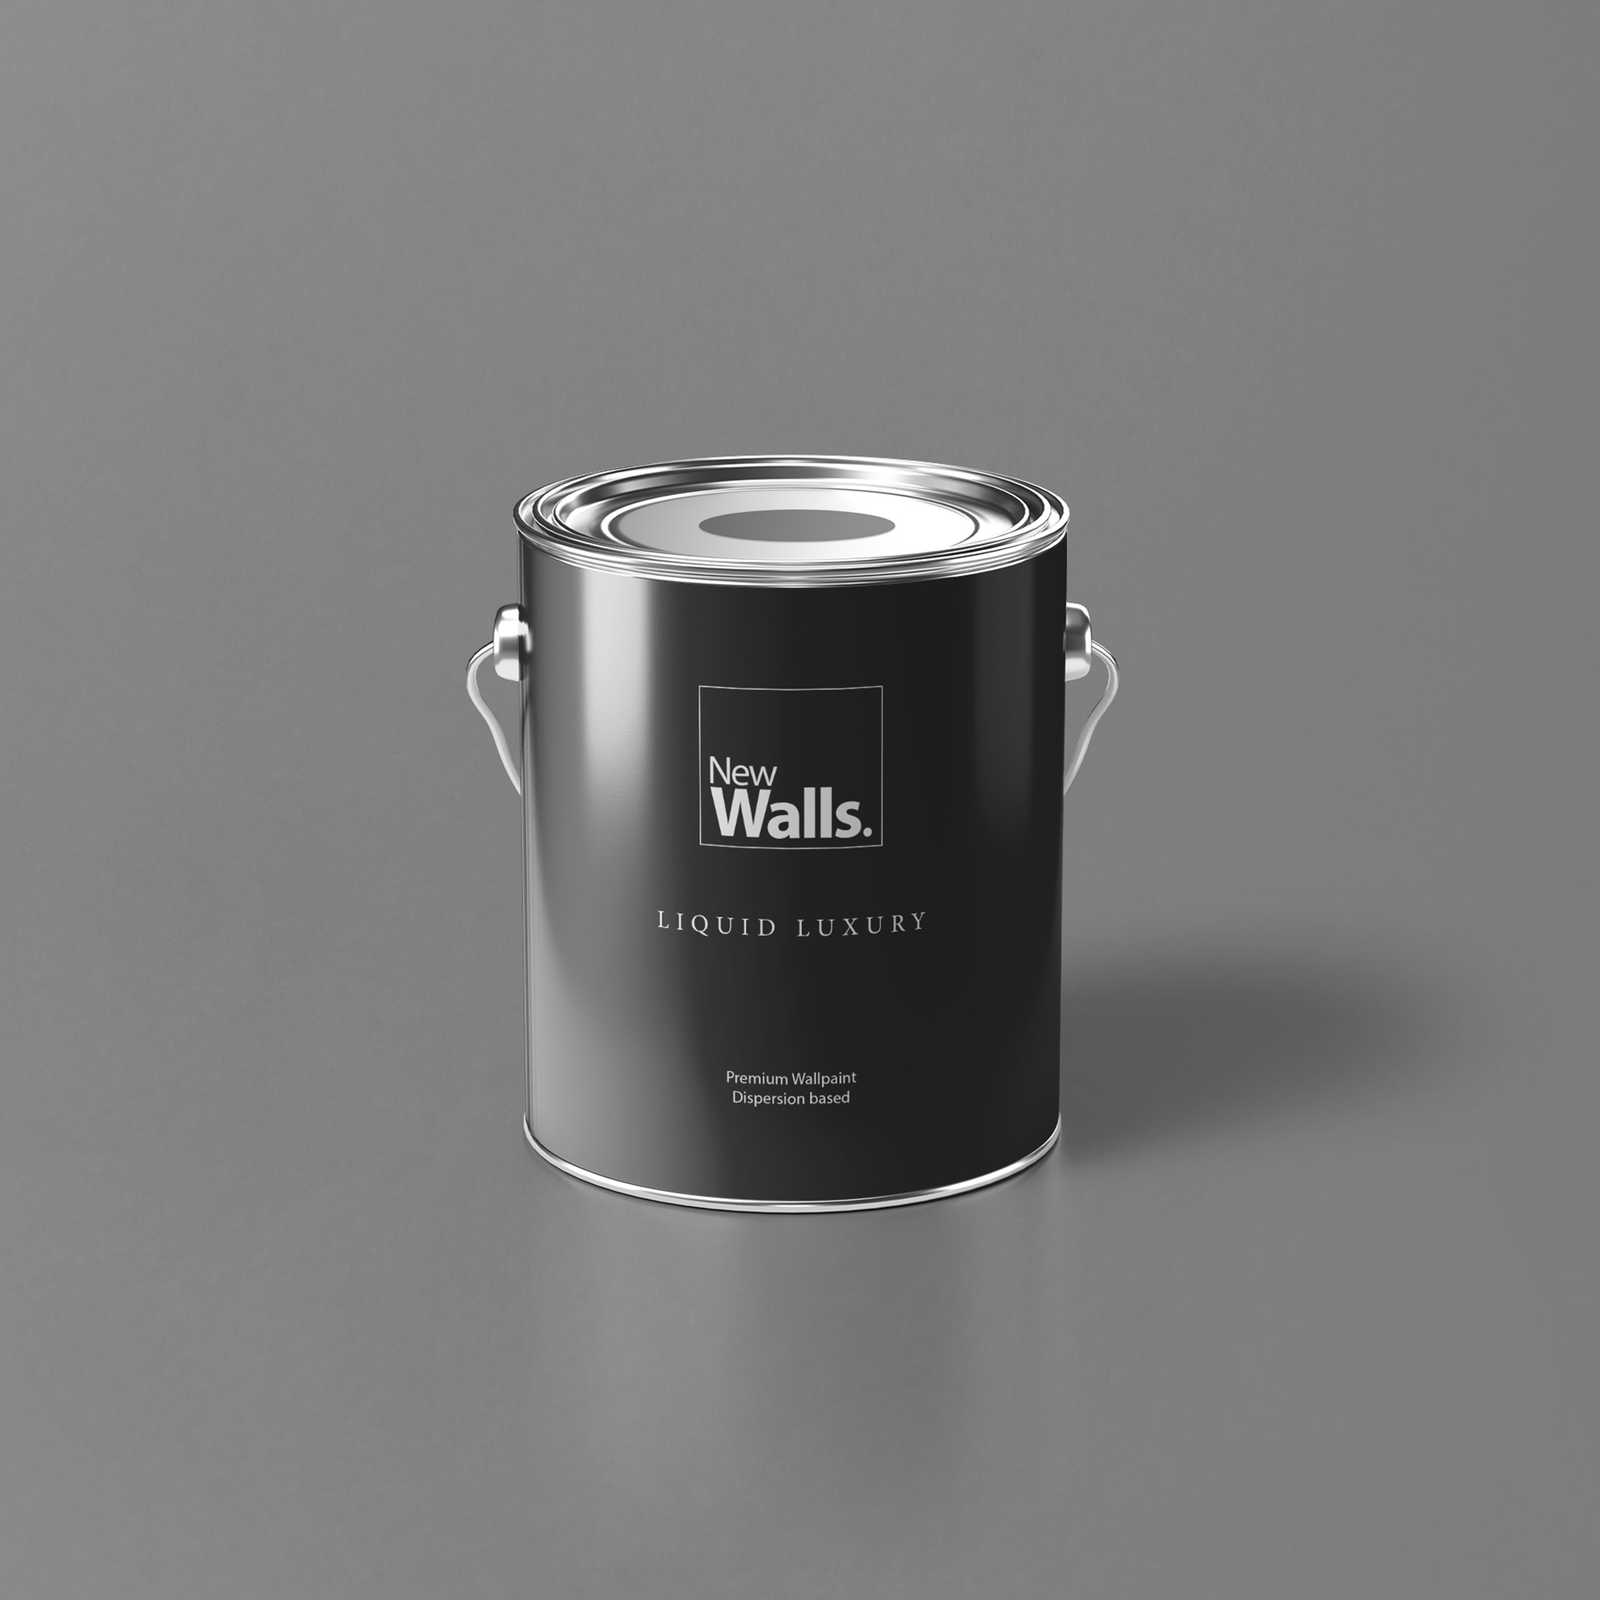 Premium Wall Paint Convincing Stone Grey »Industrial Grey« NW103 – 2.5 litre
